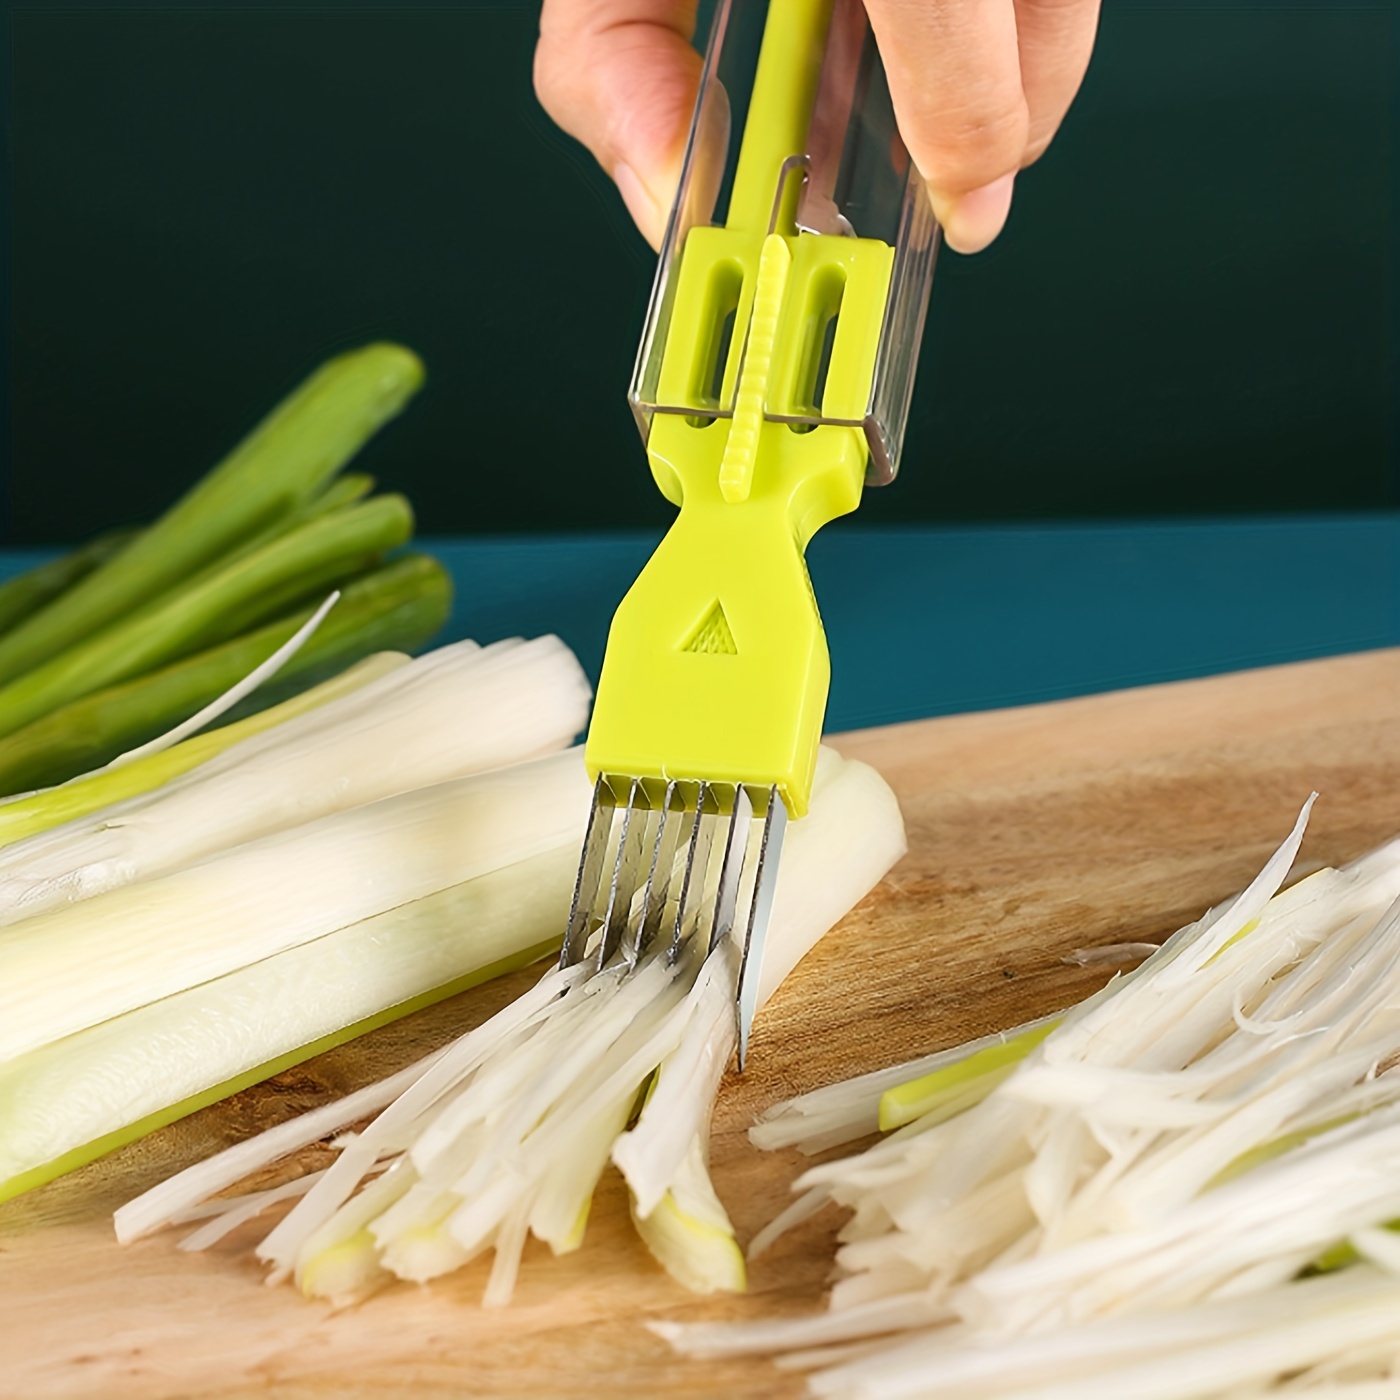 Plum Blossom Onion Cutter Multi-Function Green Onion Separator For